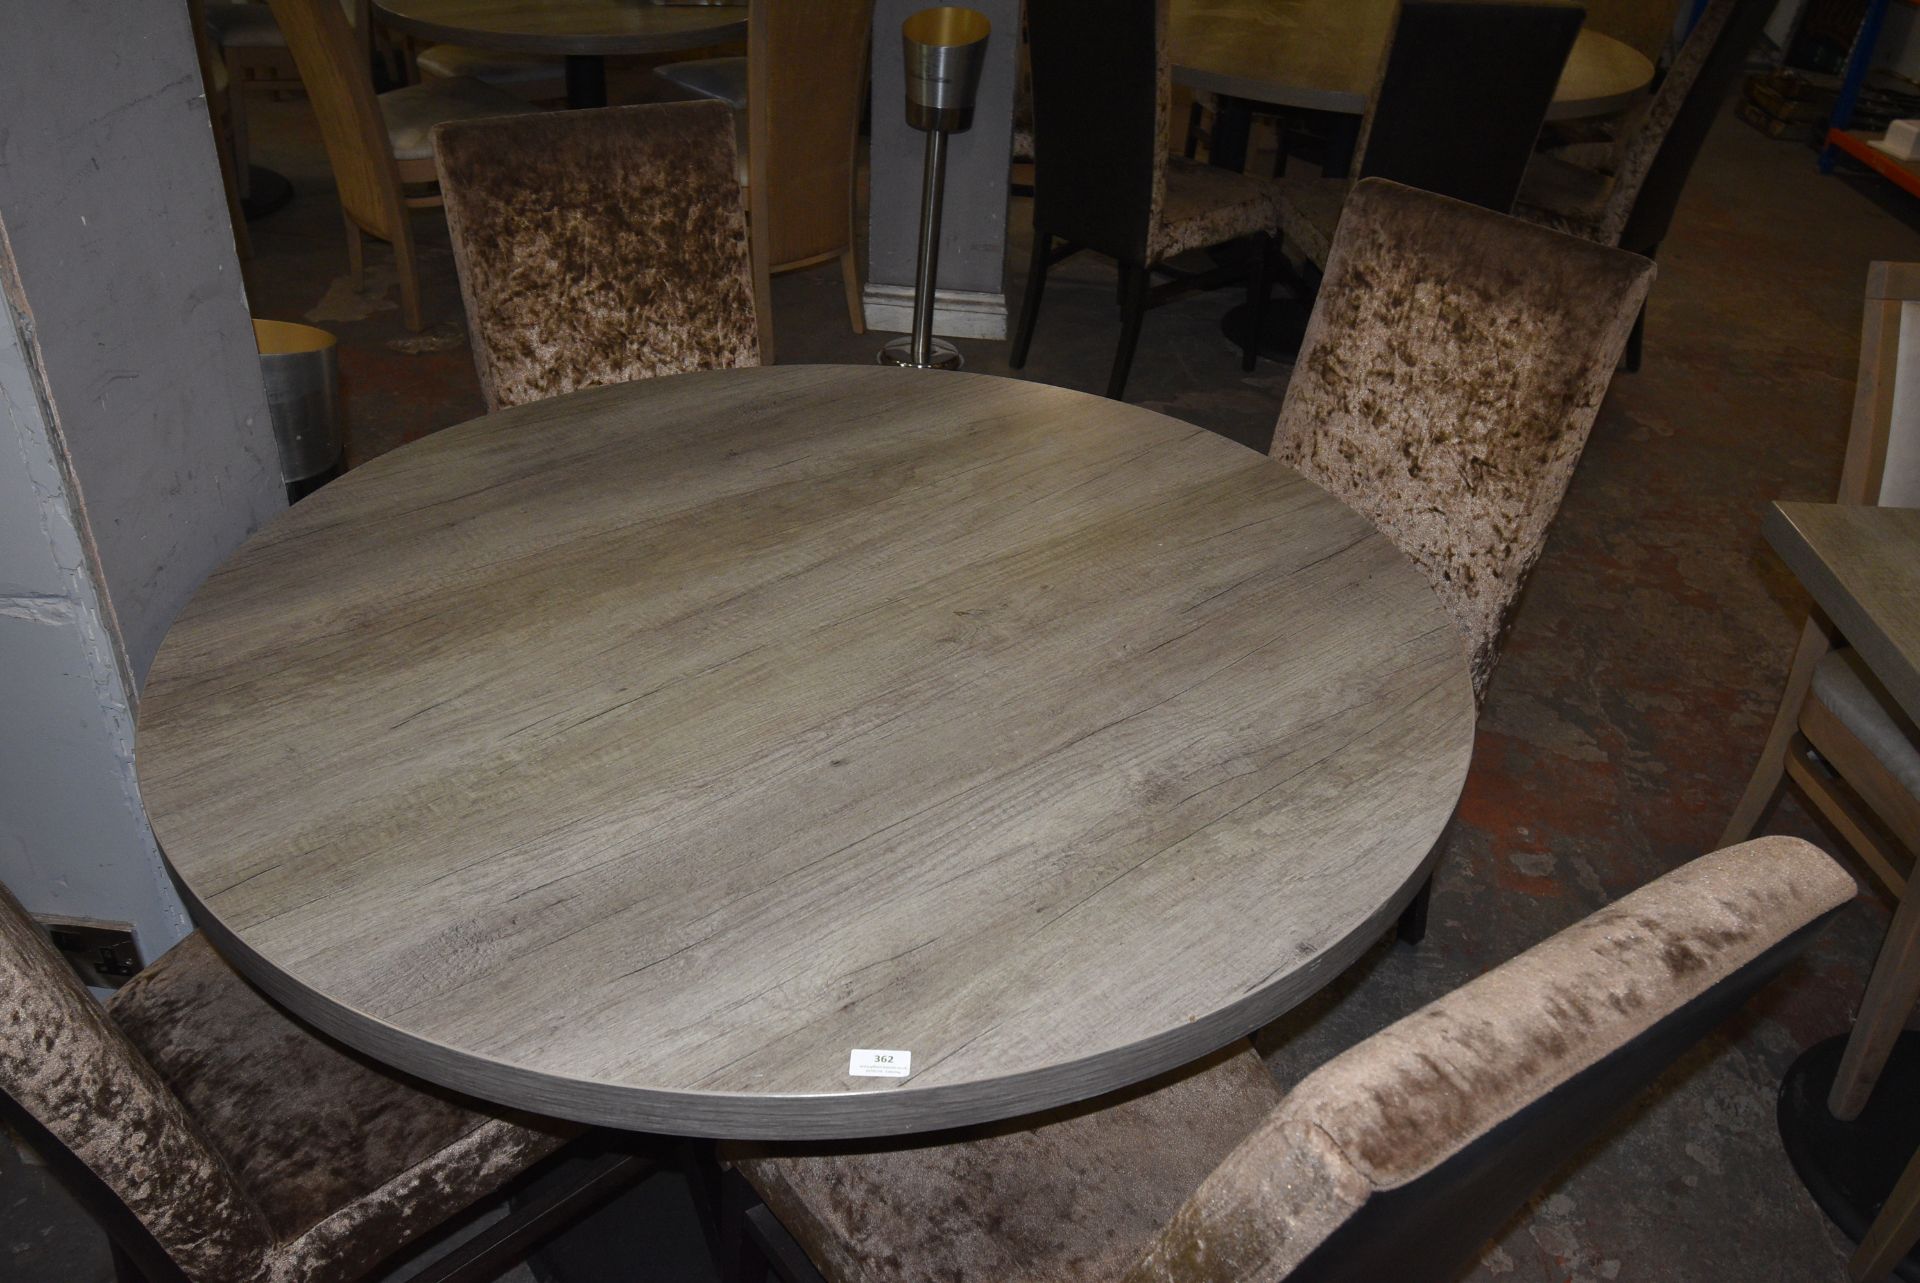 120cm Circular Single Pedestal Table with Four Chairs